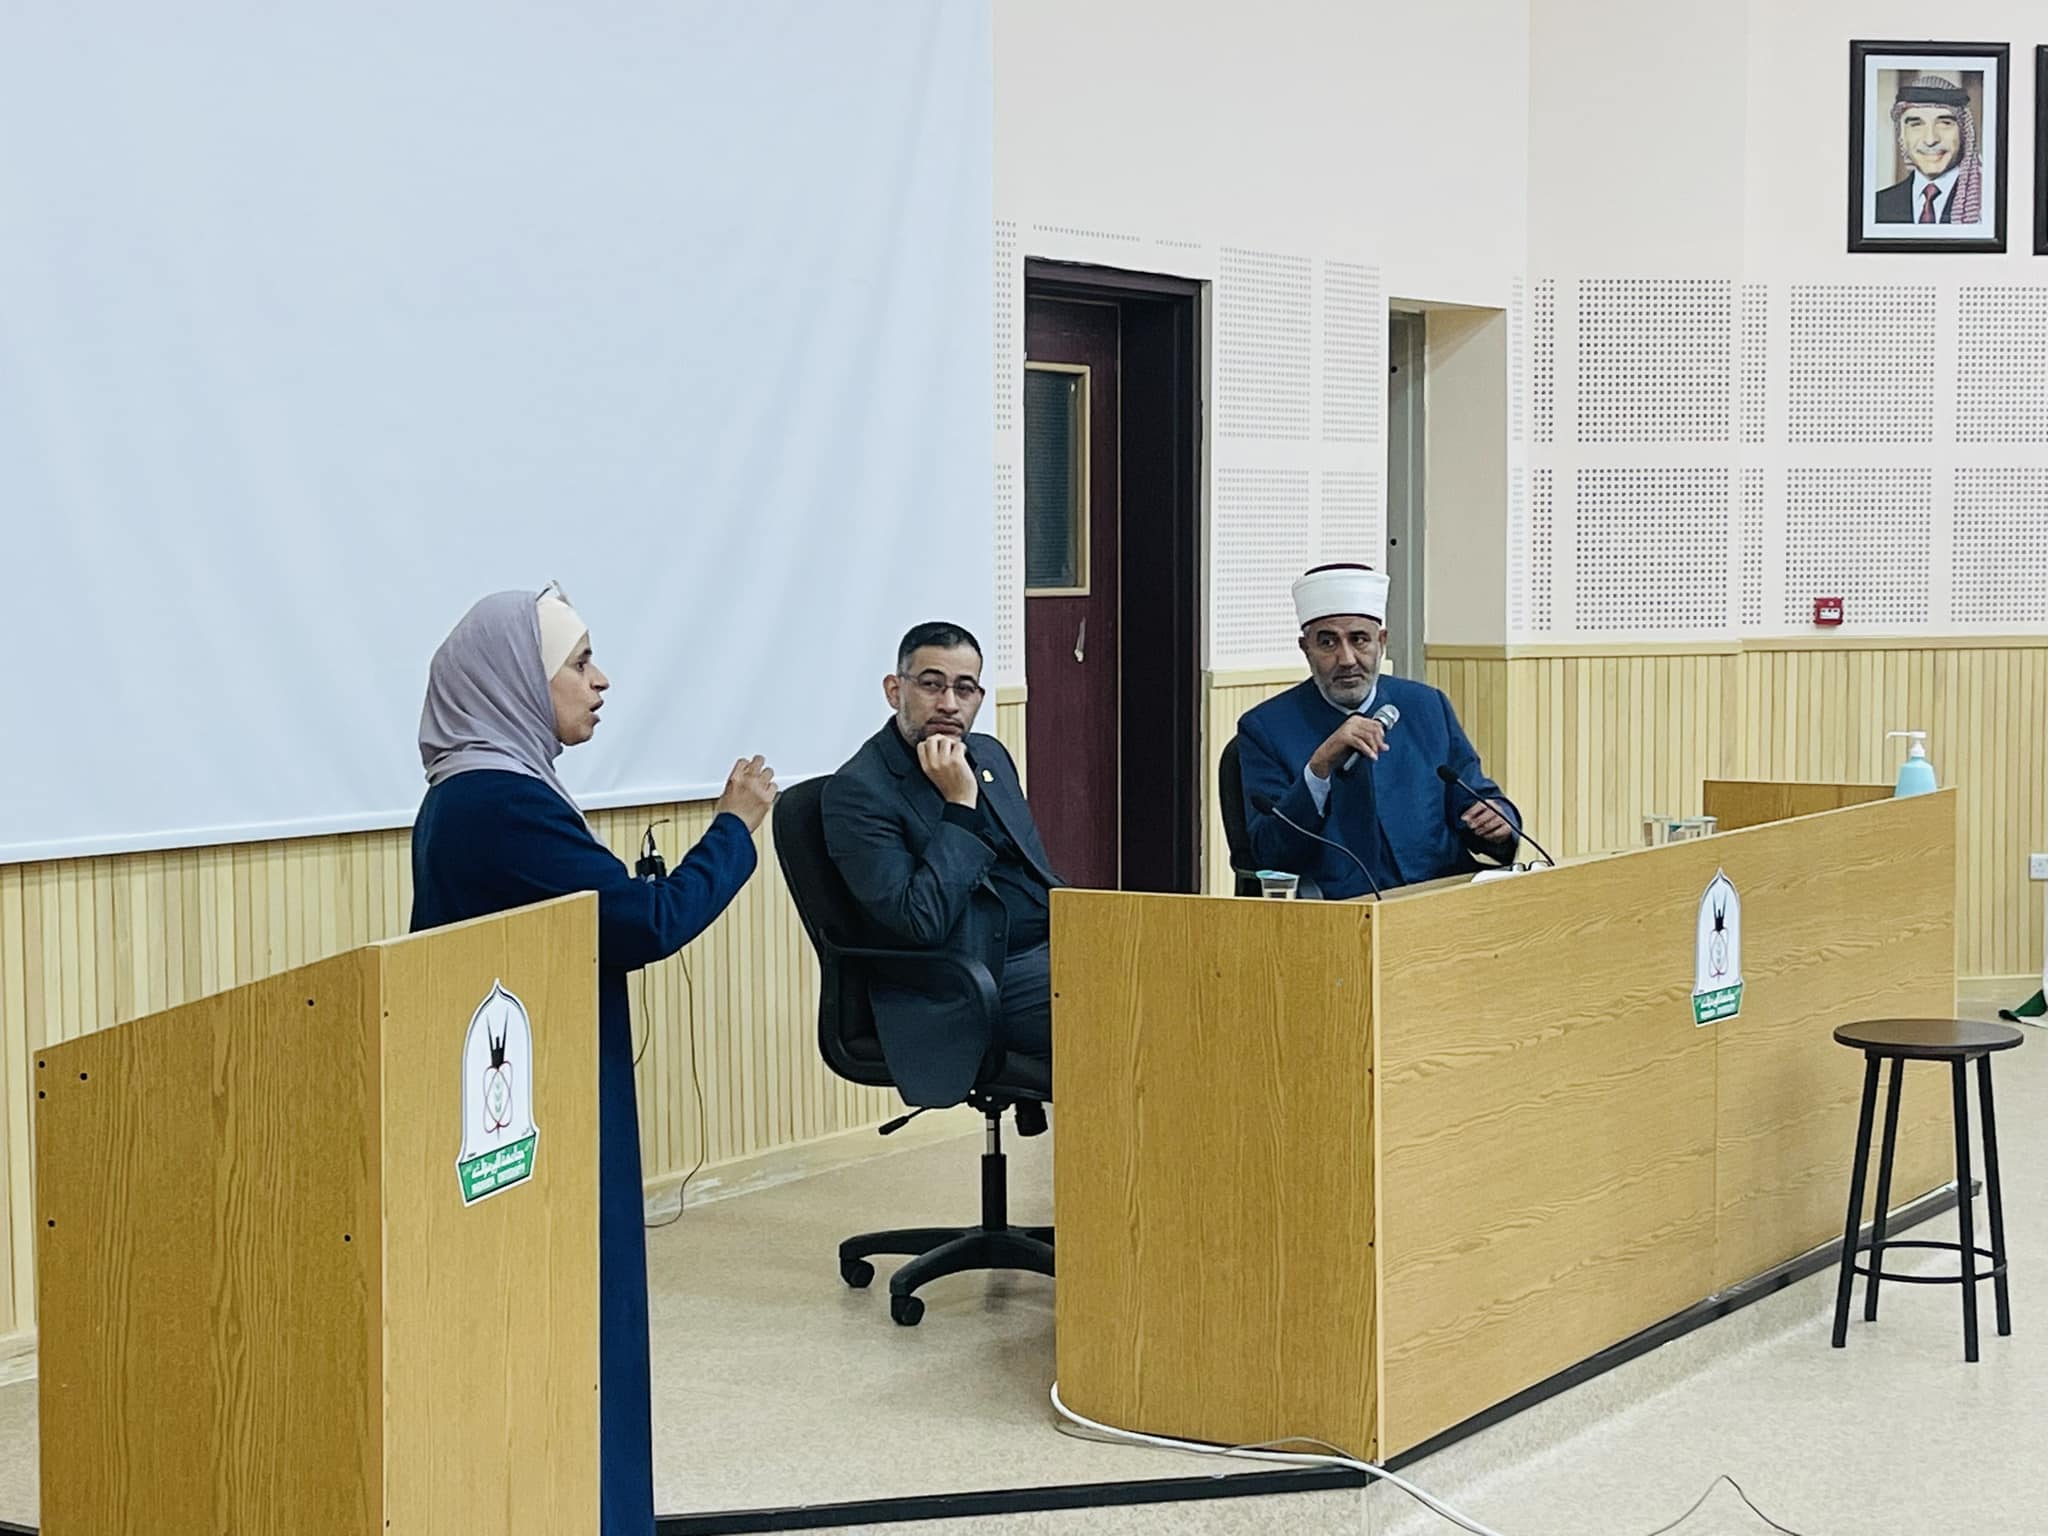 Fasting: Medical and juristic lightings, A seminar held in Faculty of Medicine 